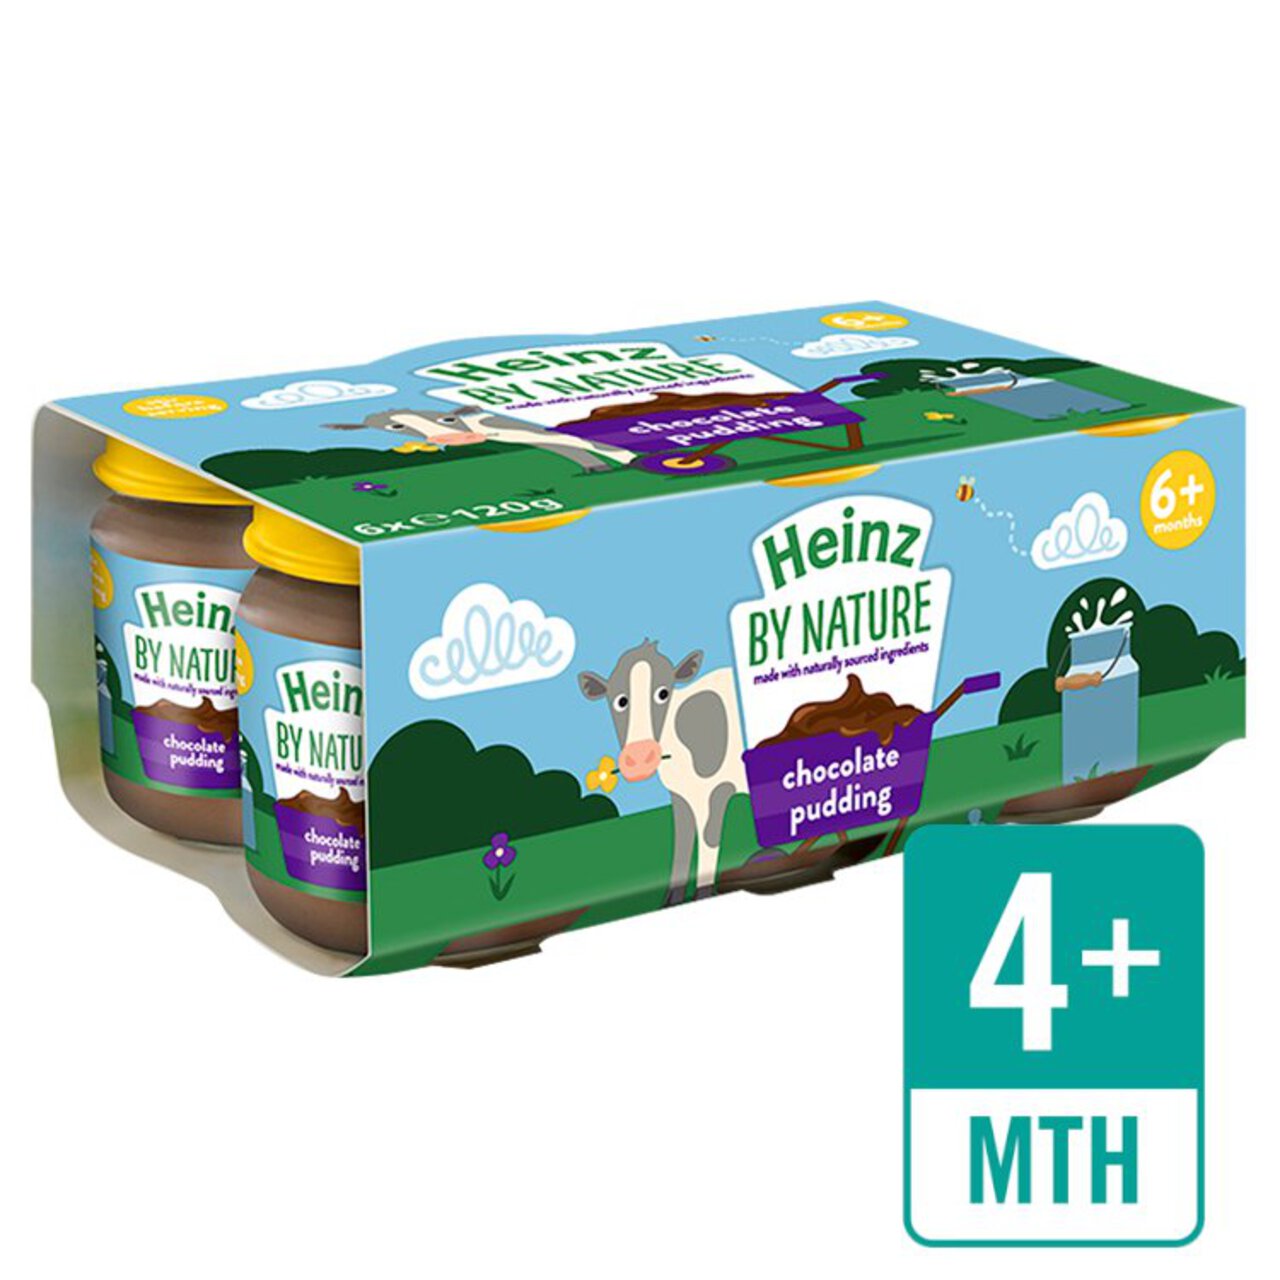 Heinz by Nature Chocolate Pudding Jars, 4 mths+ Multipack 6 x 120g